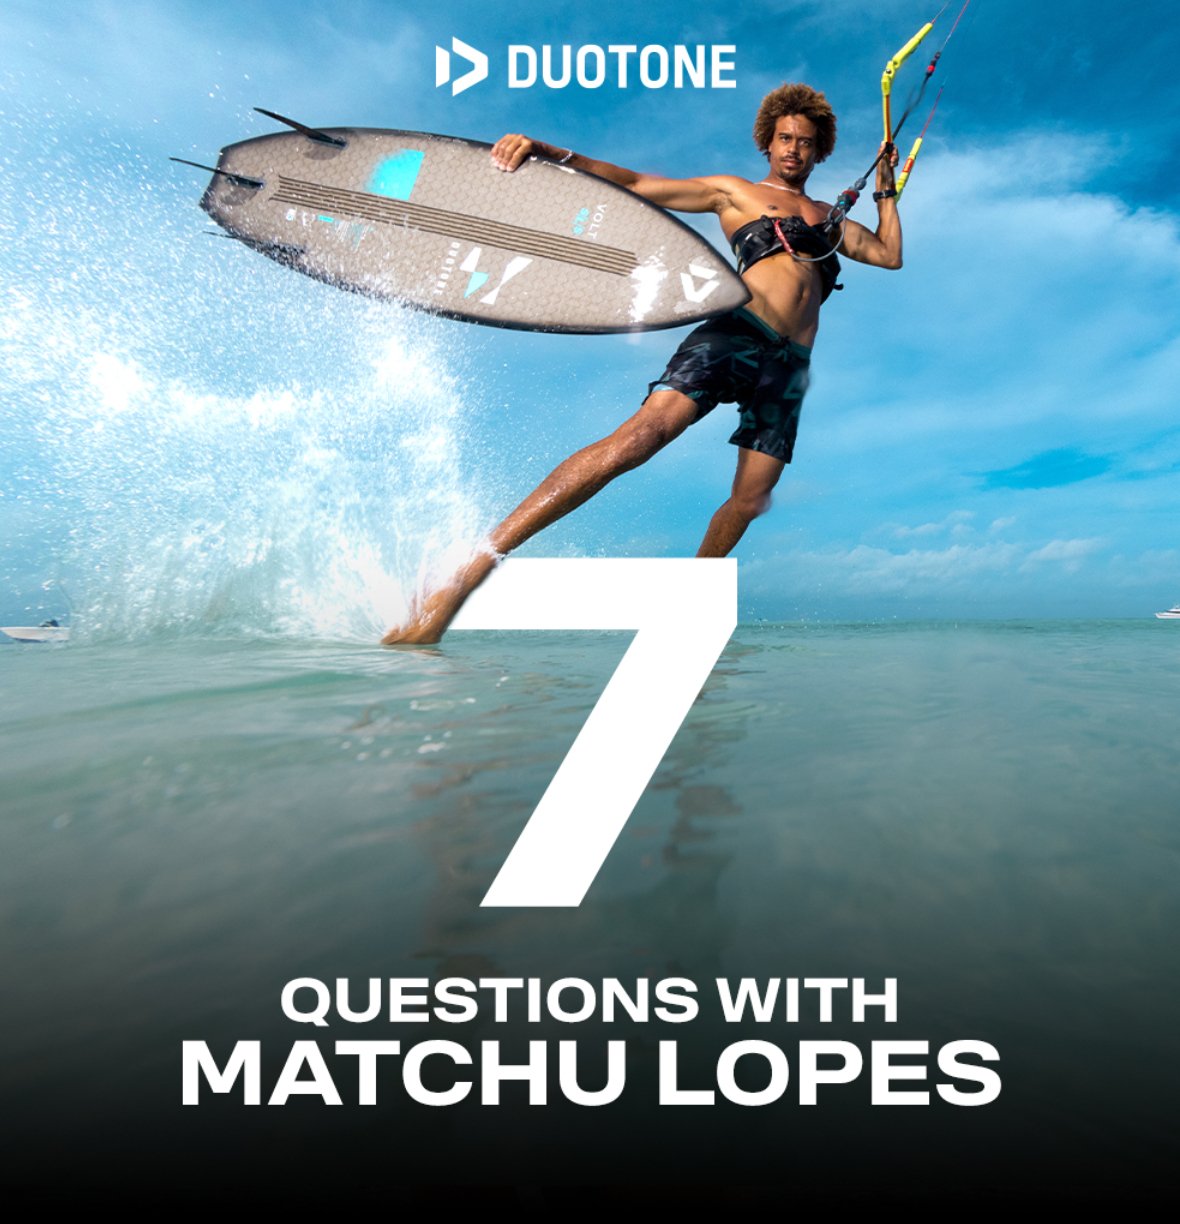 7 QUESTIONS WITH MATCHU LOPES - Worthing Watersports